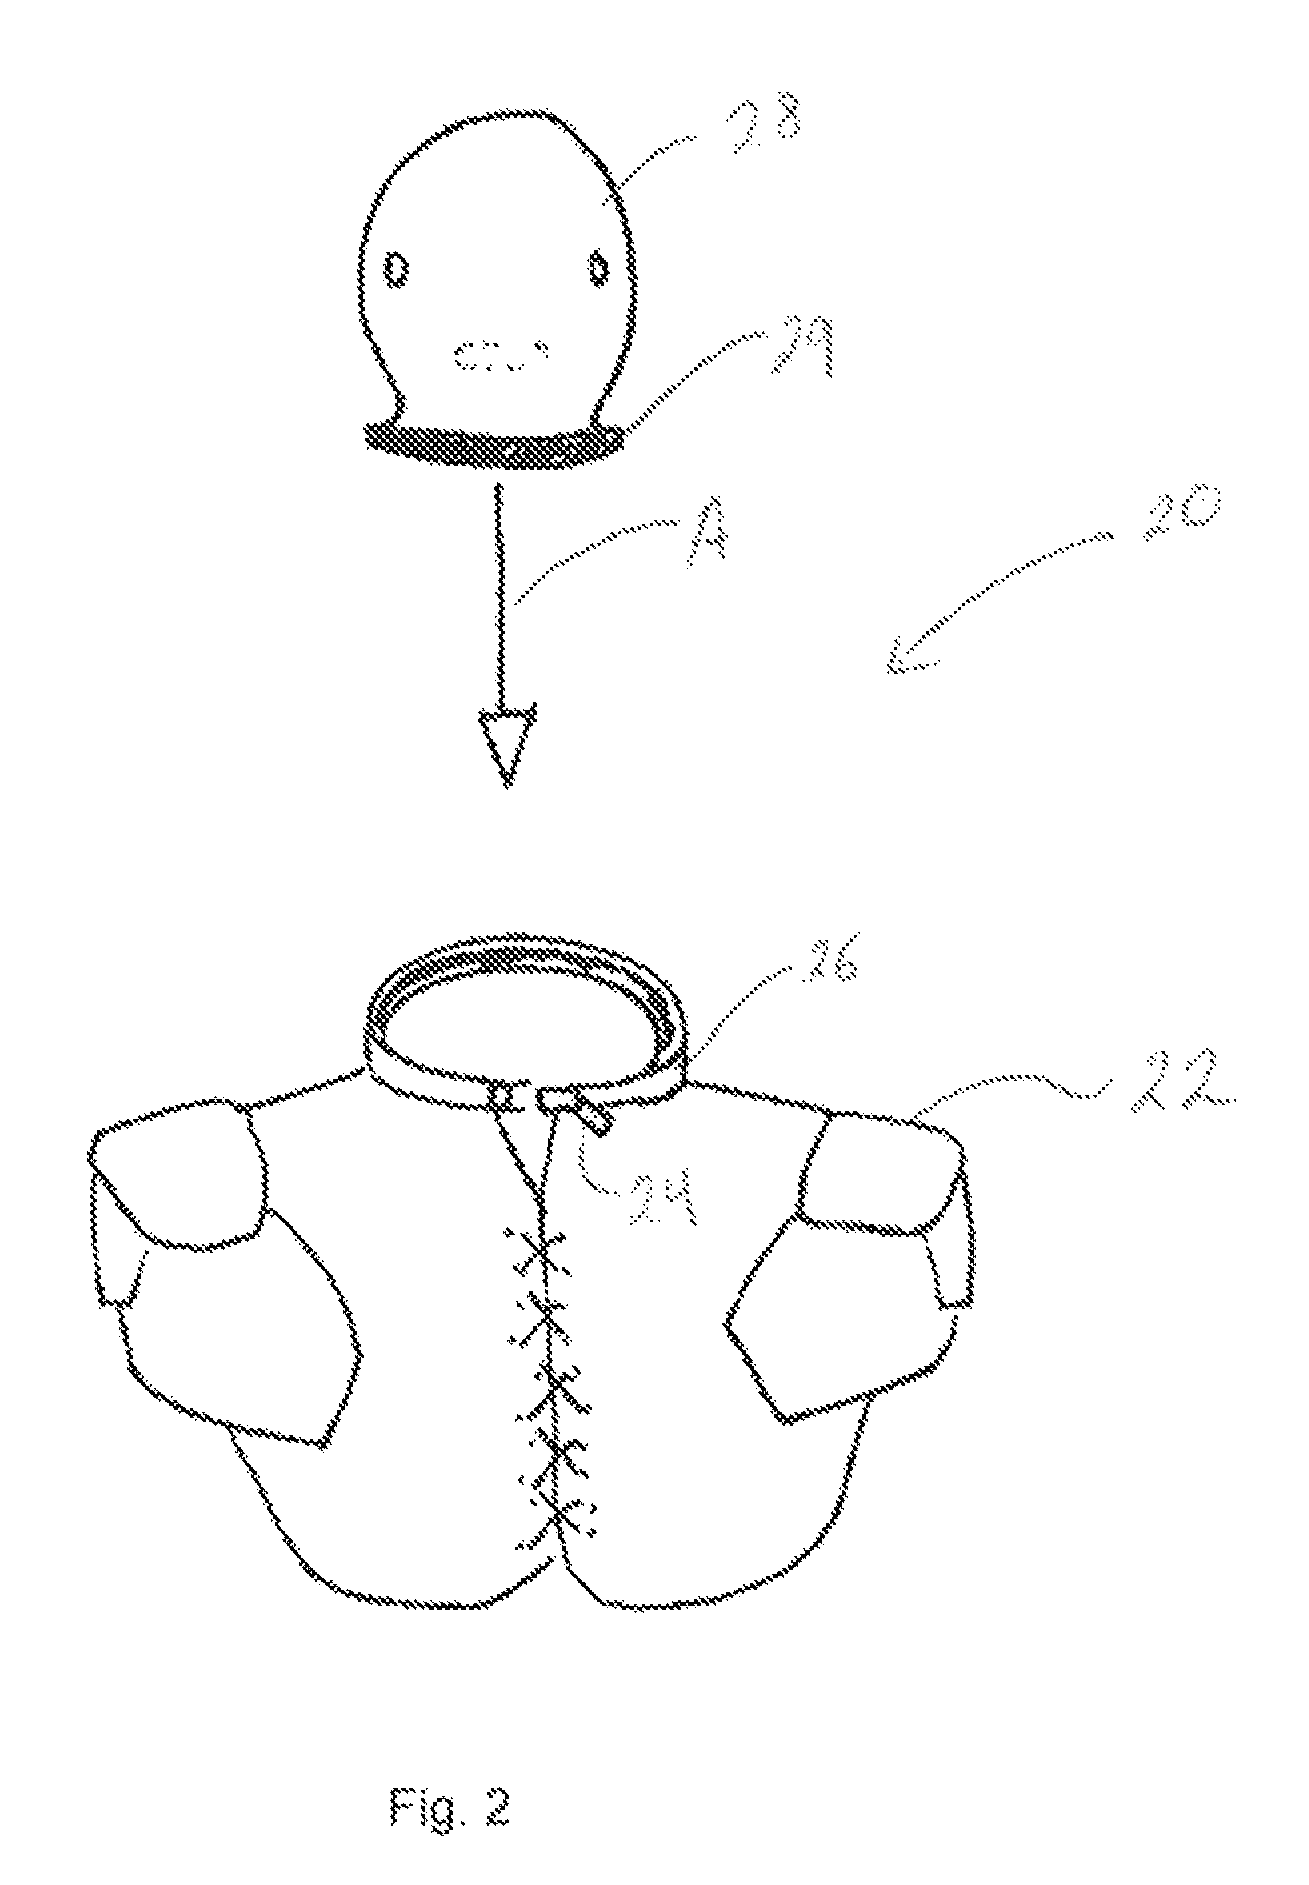 Head and neck protection apparatus